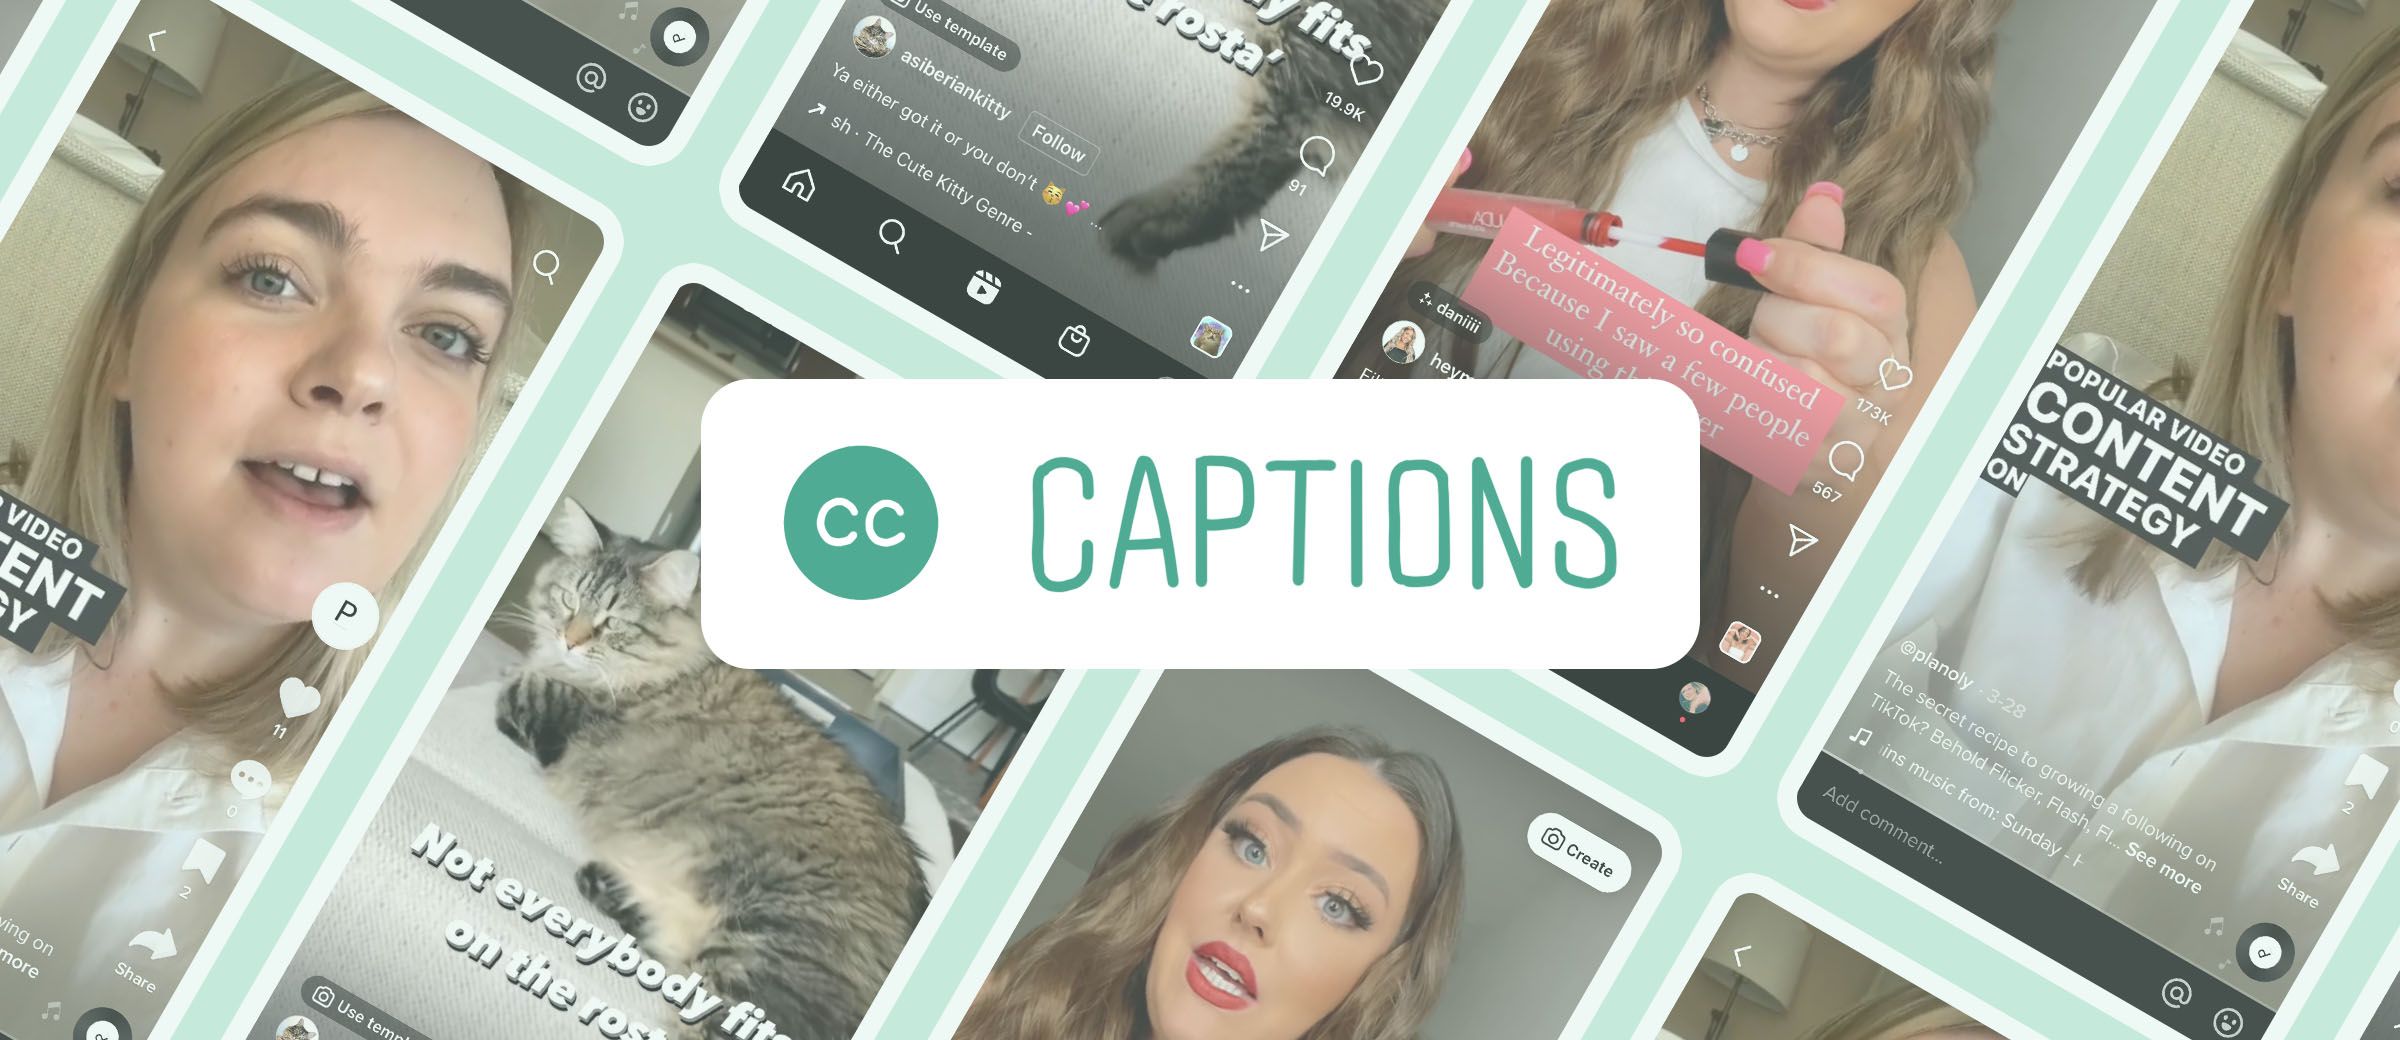 Should You Add Captions to Video Content?, by danielle-townsley